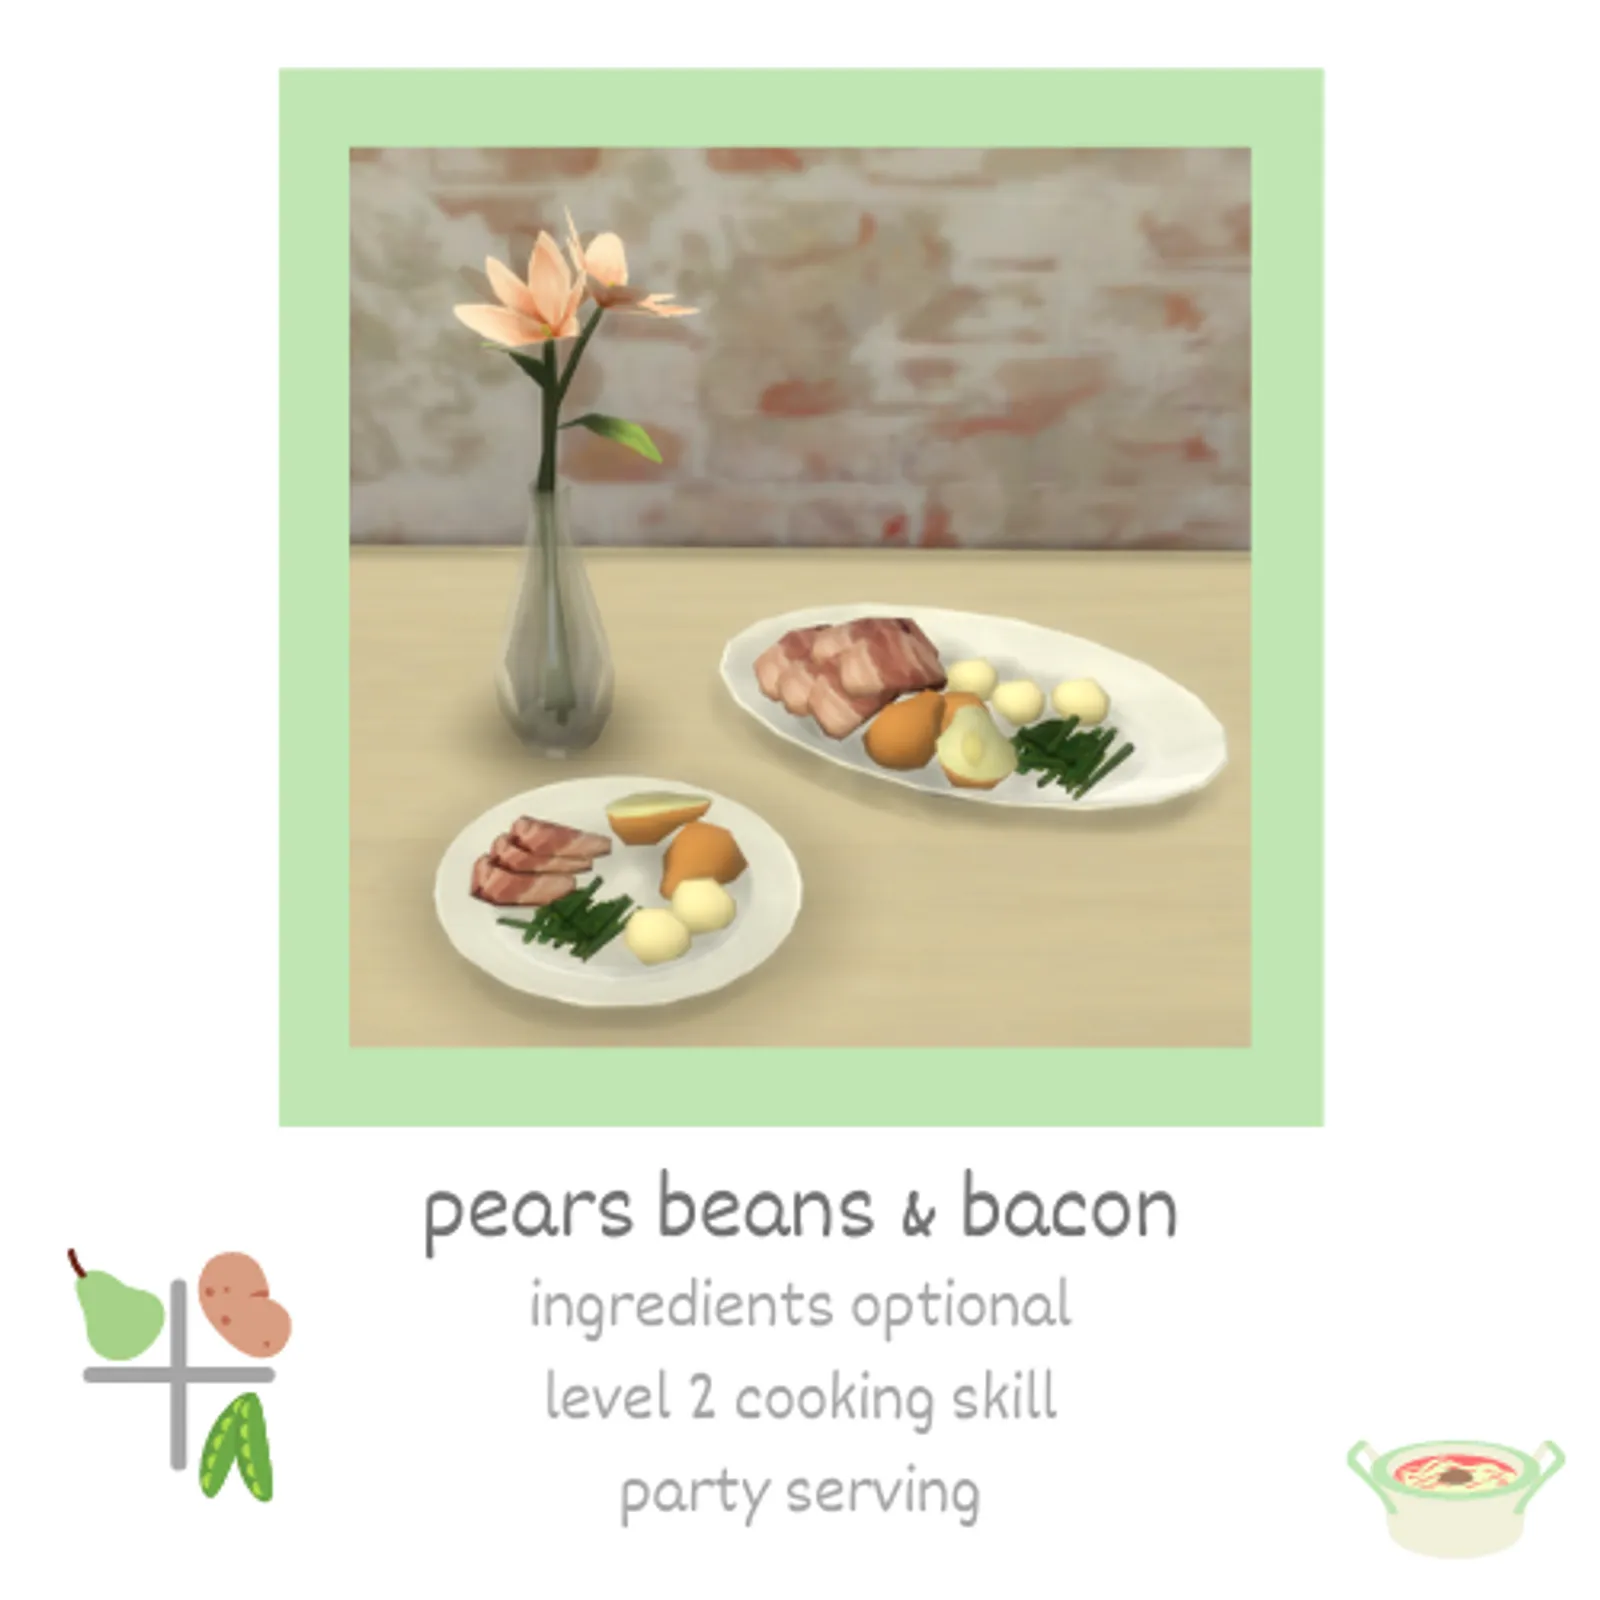 pears beans and bacon